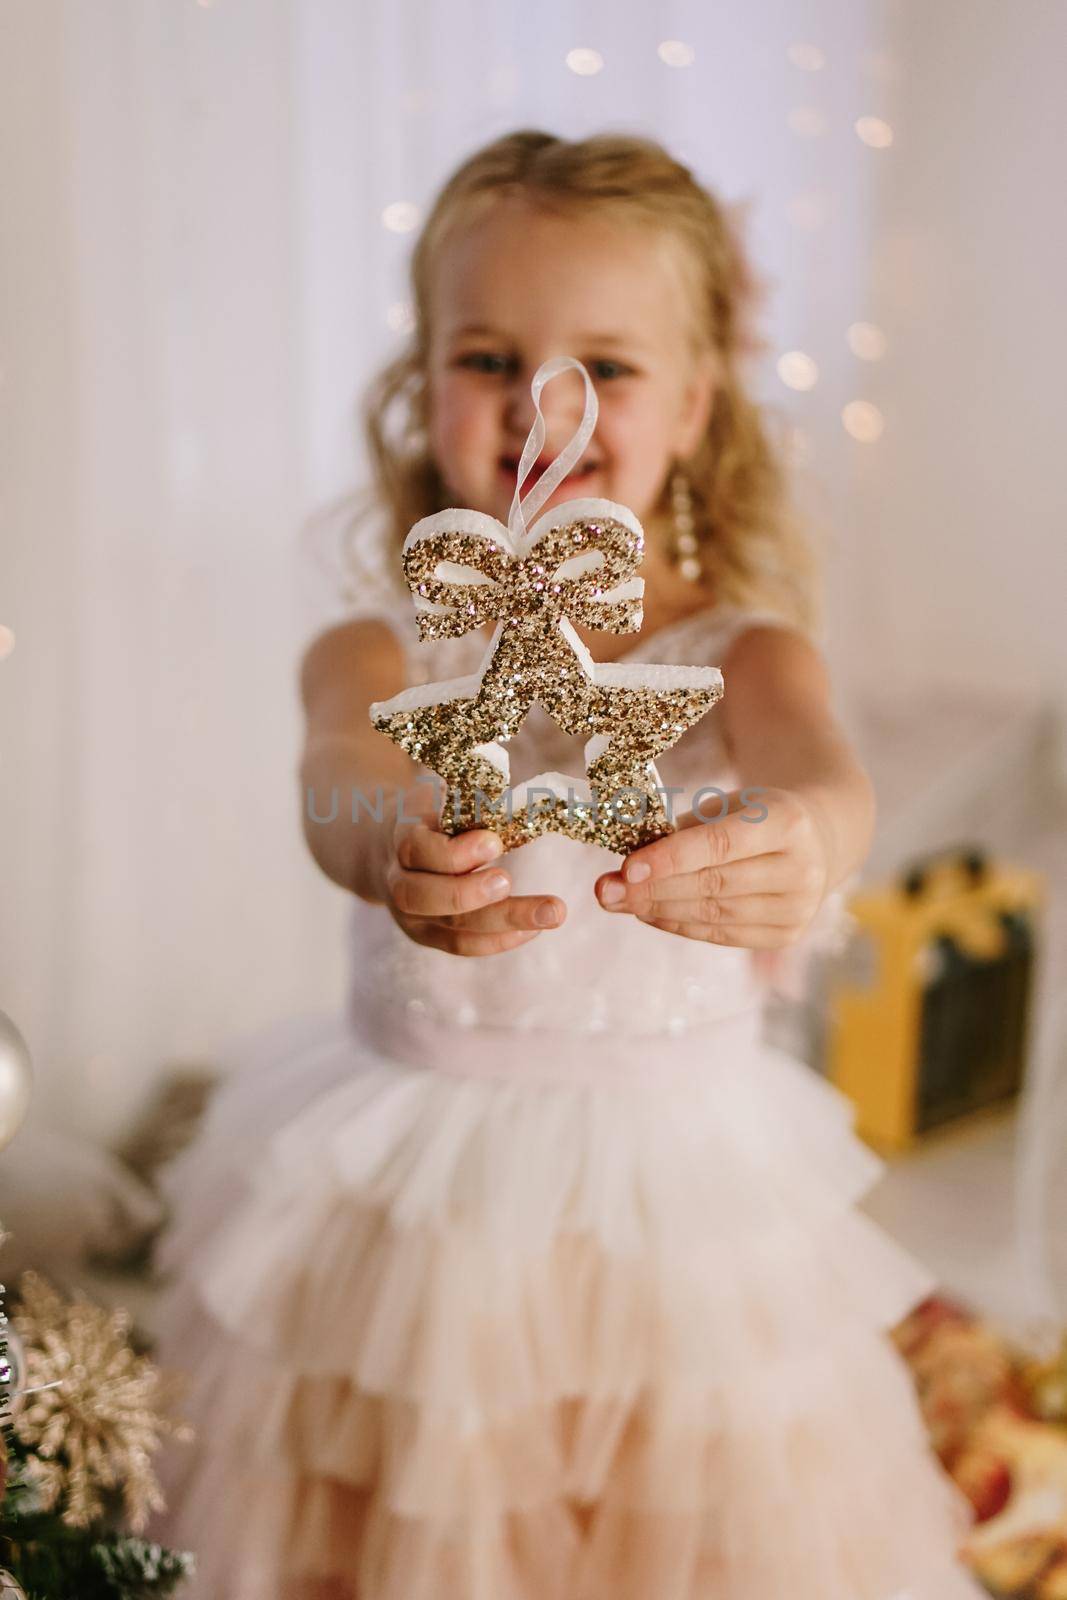 Little cute girl with Christmas star in her hands smiling on the Christmas decor by natali_brill